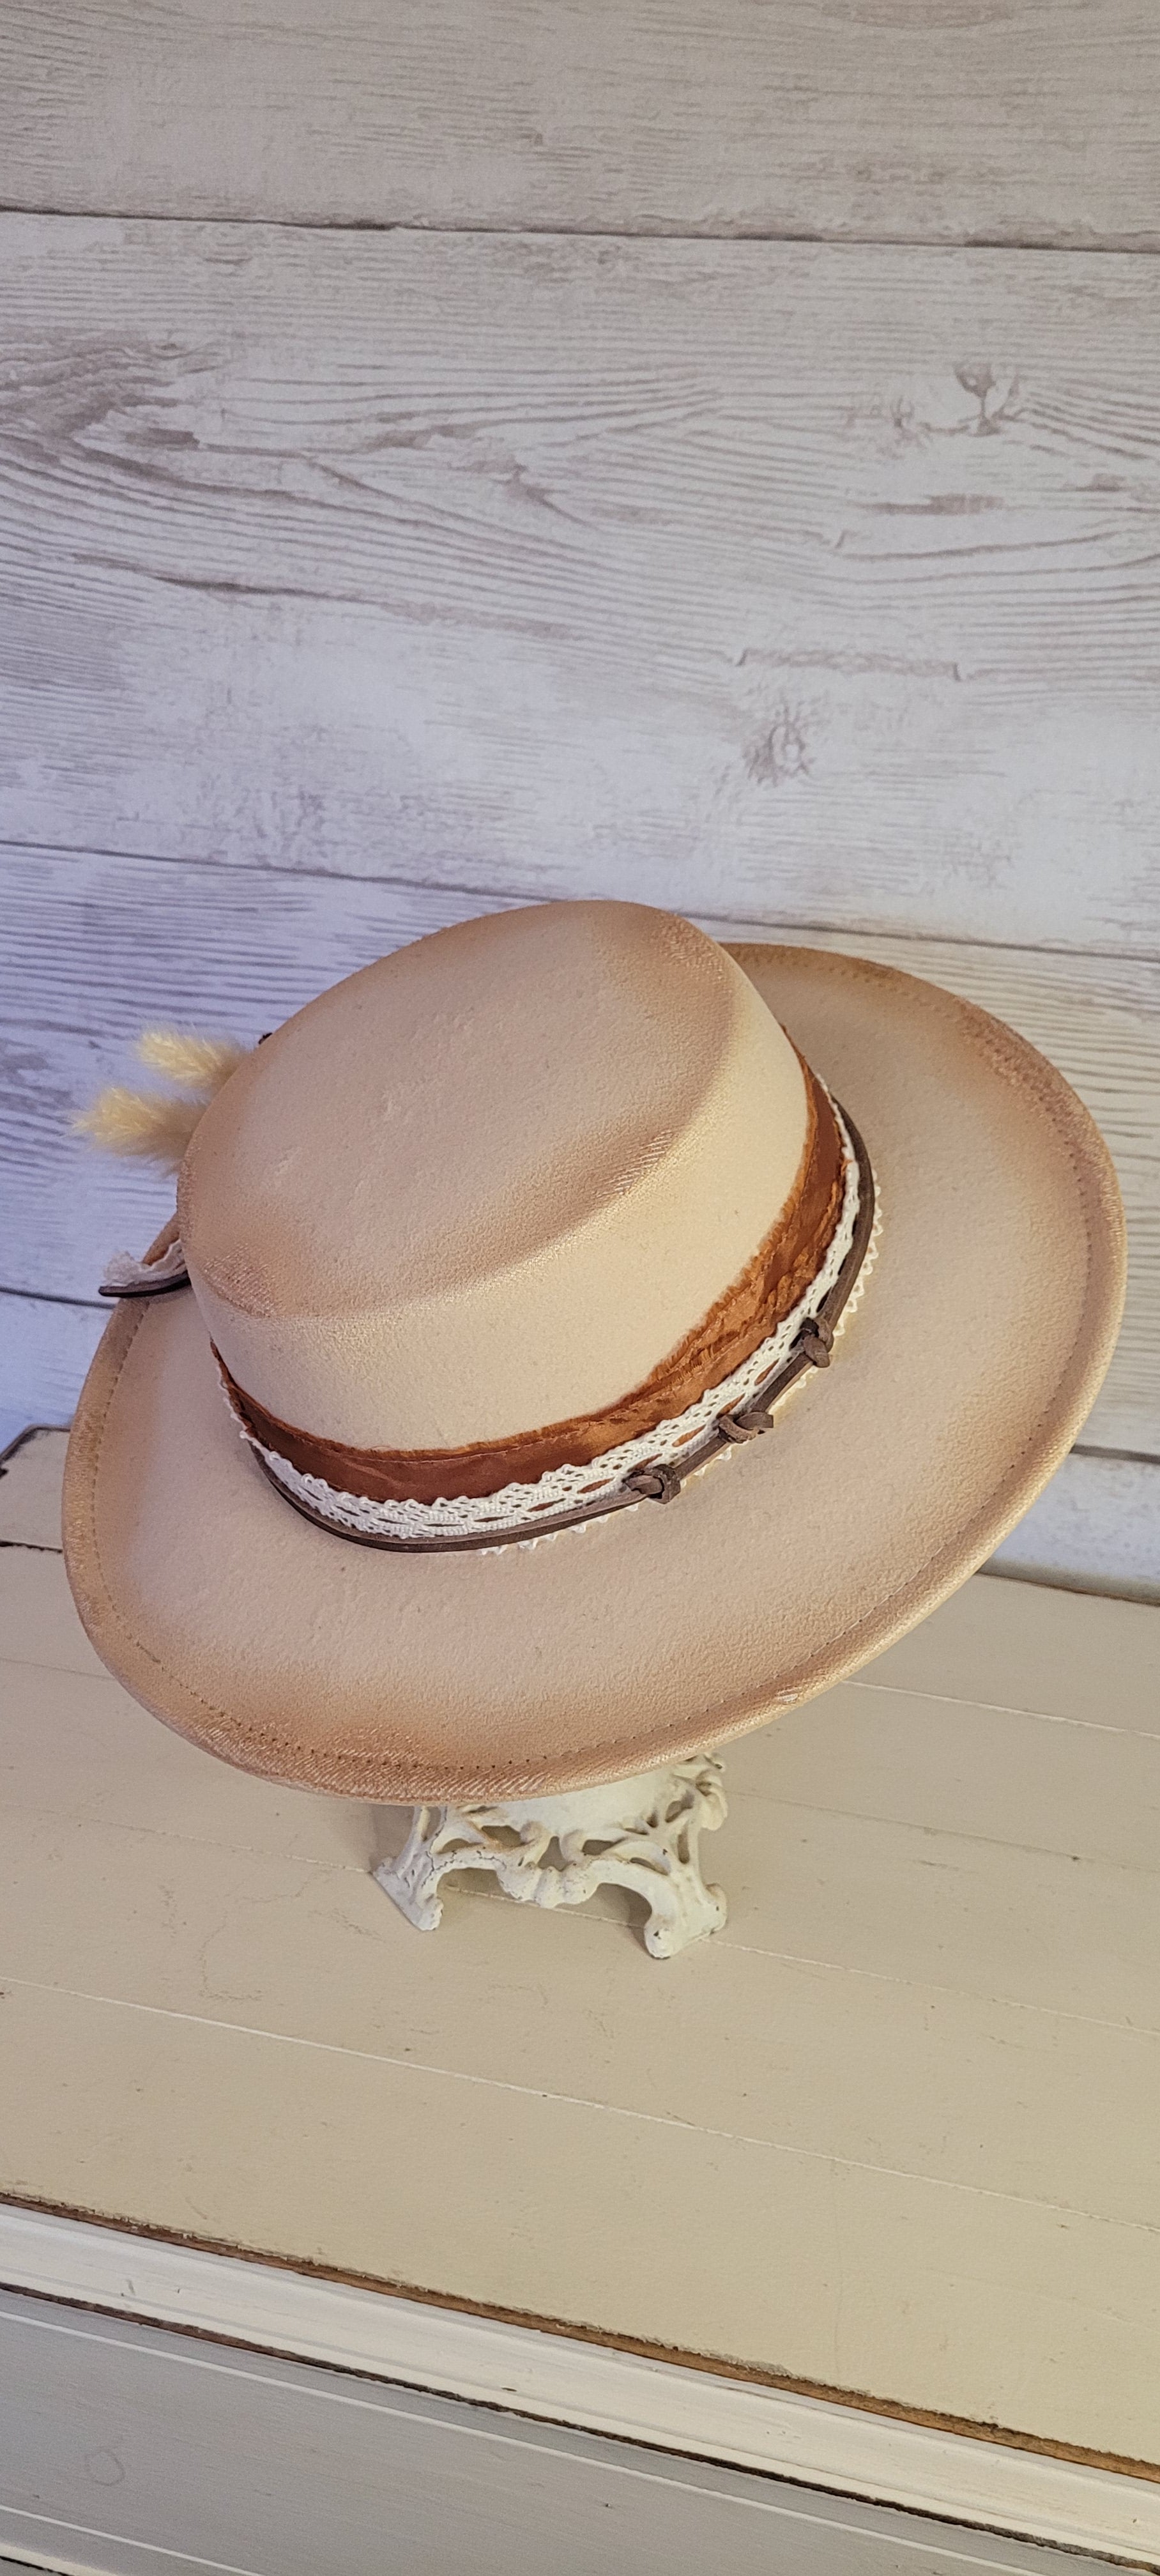 Lace ribbon, frayed lace ribbon, leather band, pampas, pine cones Felt hat Flat brim 100% polyester Ribbon drawstring for hat size adjustment Head Circumference: 24" Crown Height: 3.5" Brim Length: 13.5" Brim Width: 12.75" Branded & numbered inside crown Custom burned & engraved by Kayla